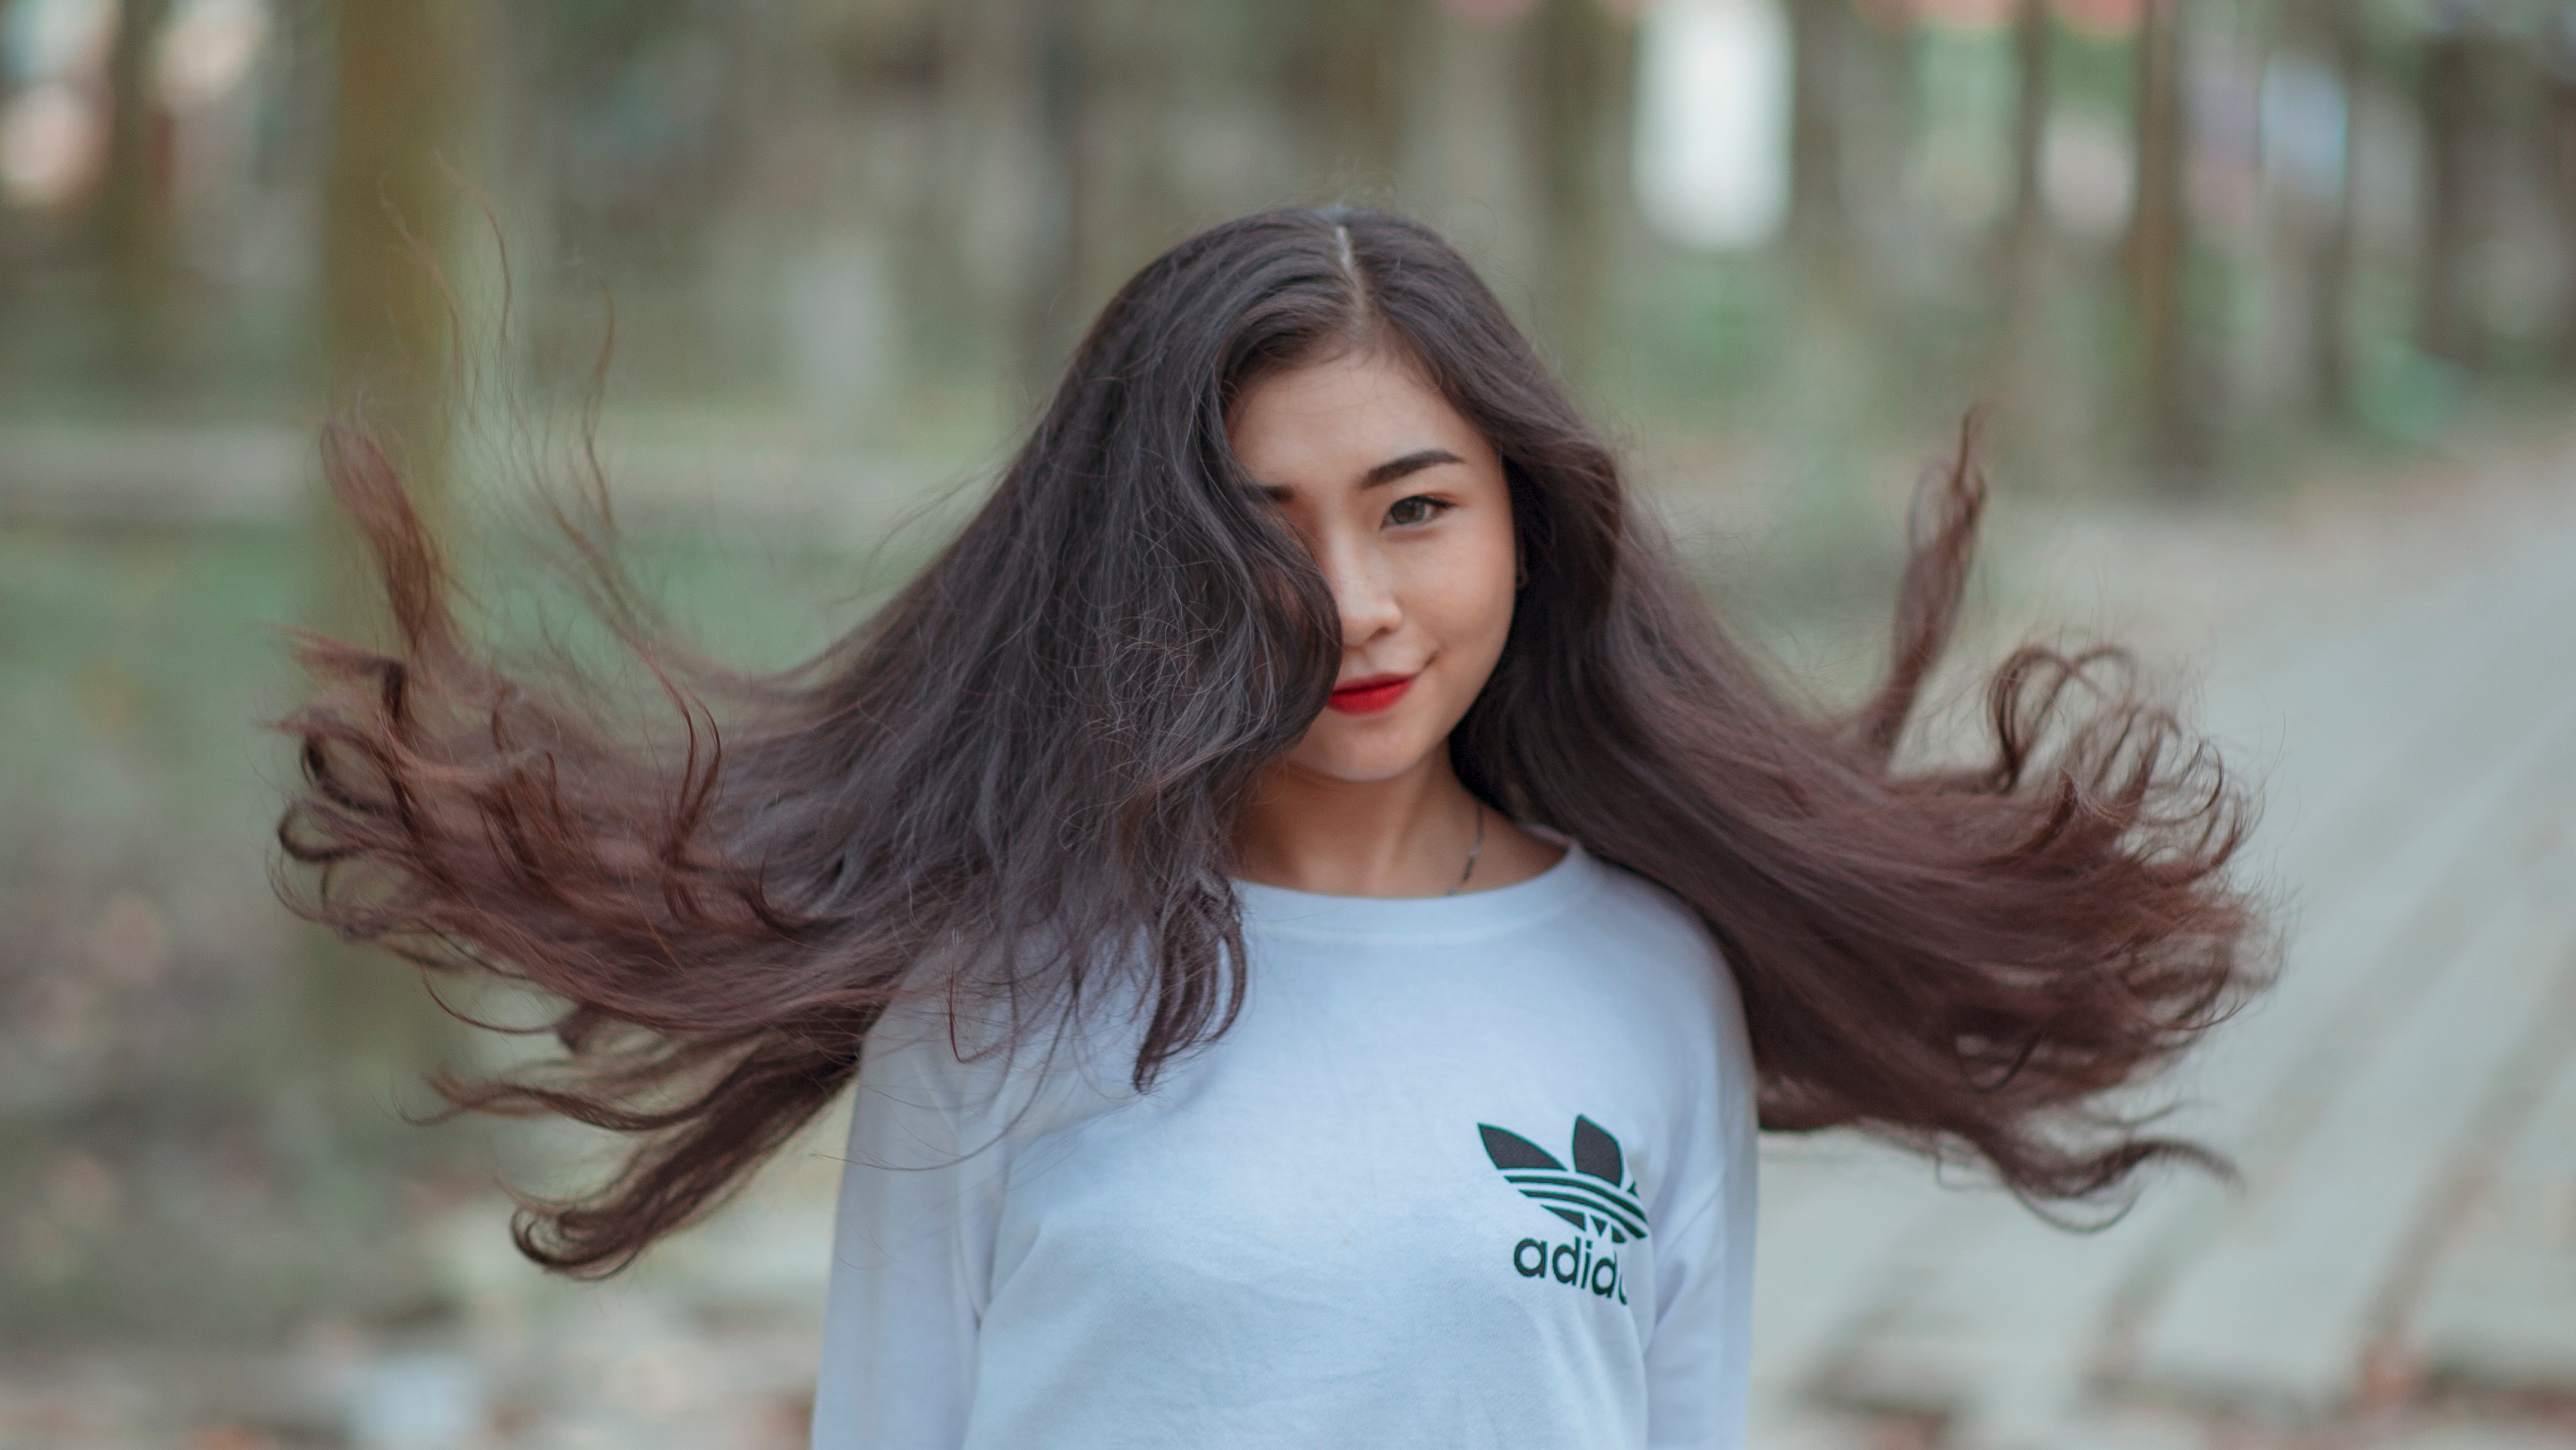 Free photo: Woman With Long Hair Waving on Air and Wearing White Adidas ...